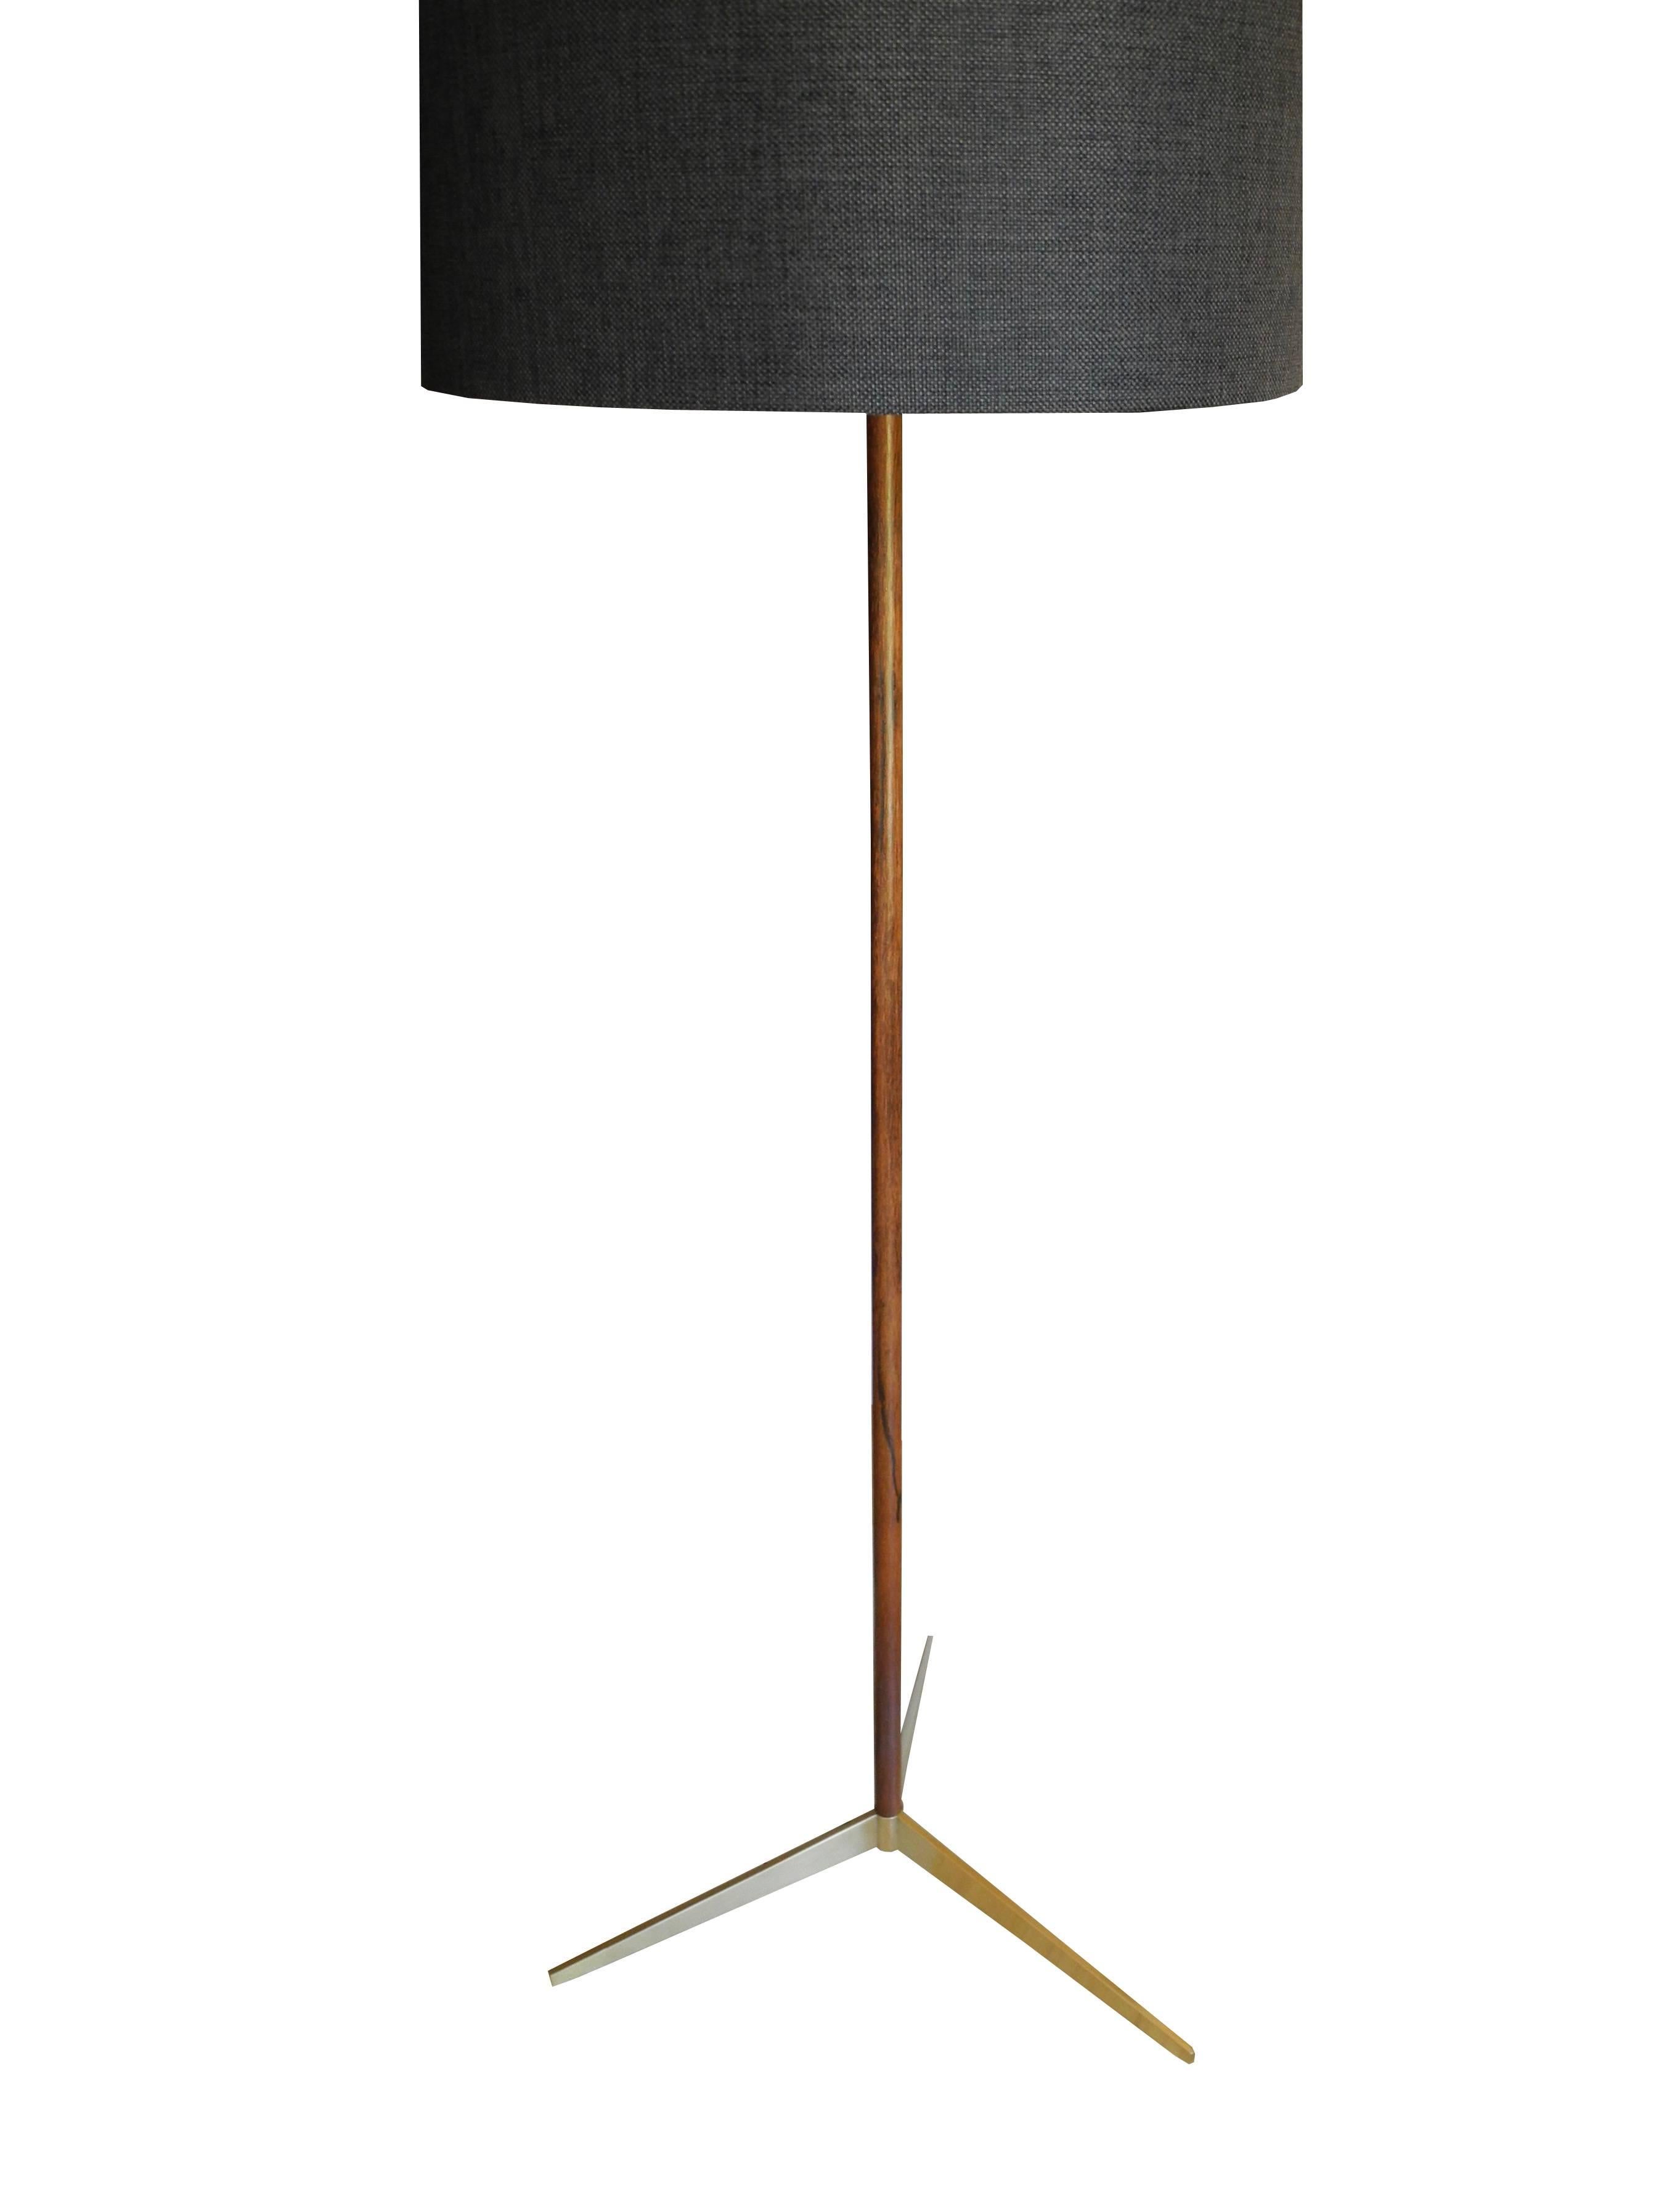 Super sleek and simple modern rosewood stem and brass tripod base with a charcoal drum shade.